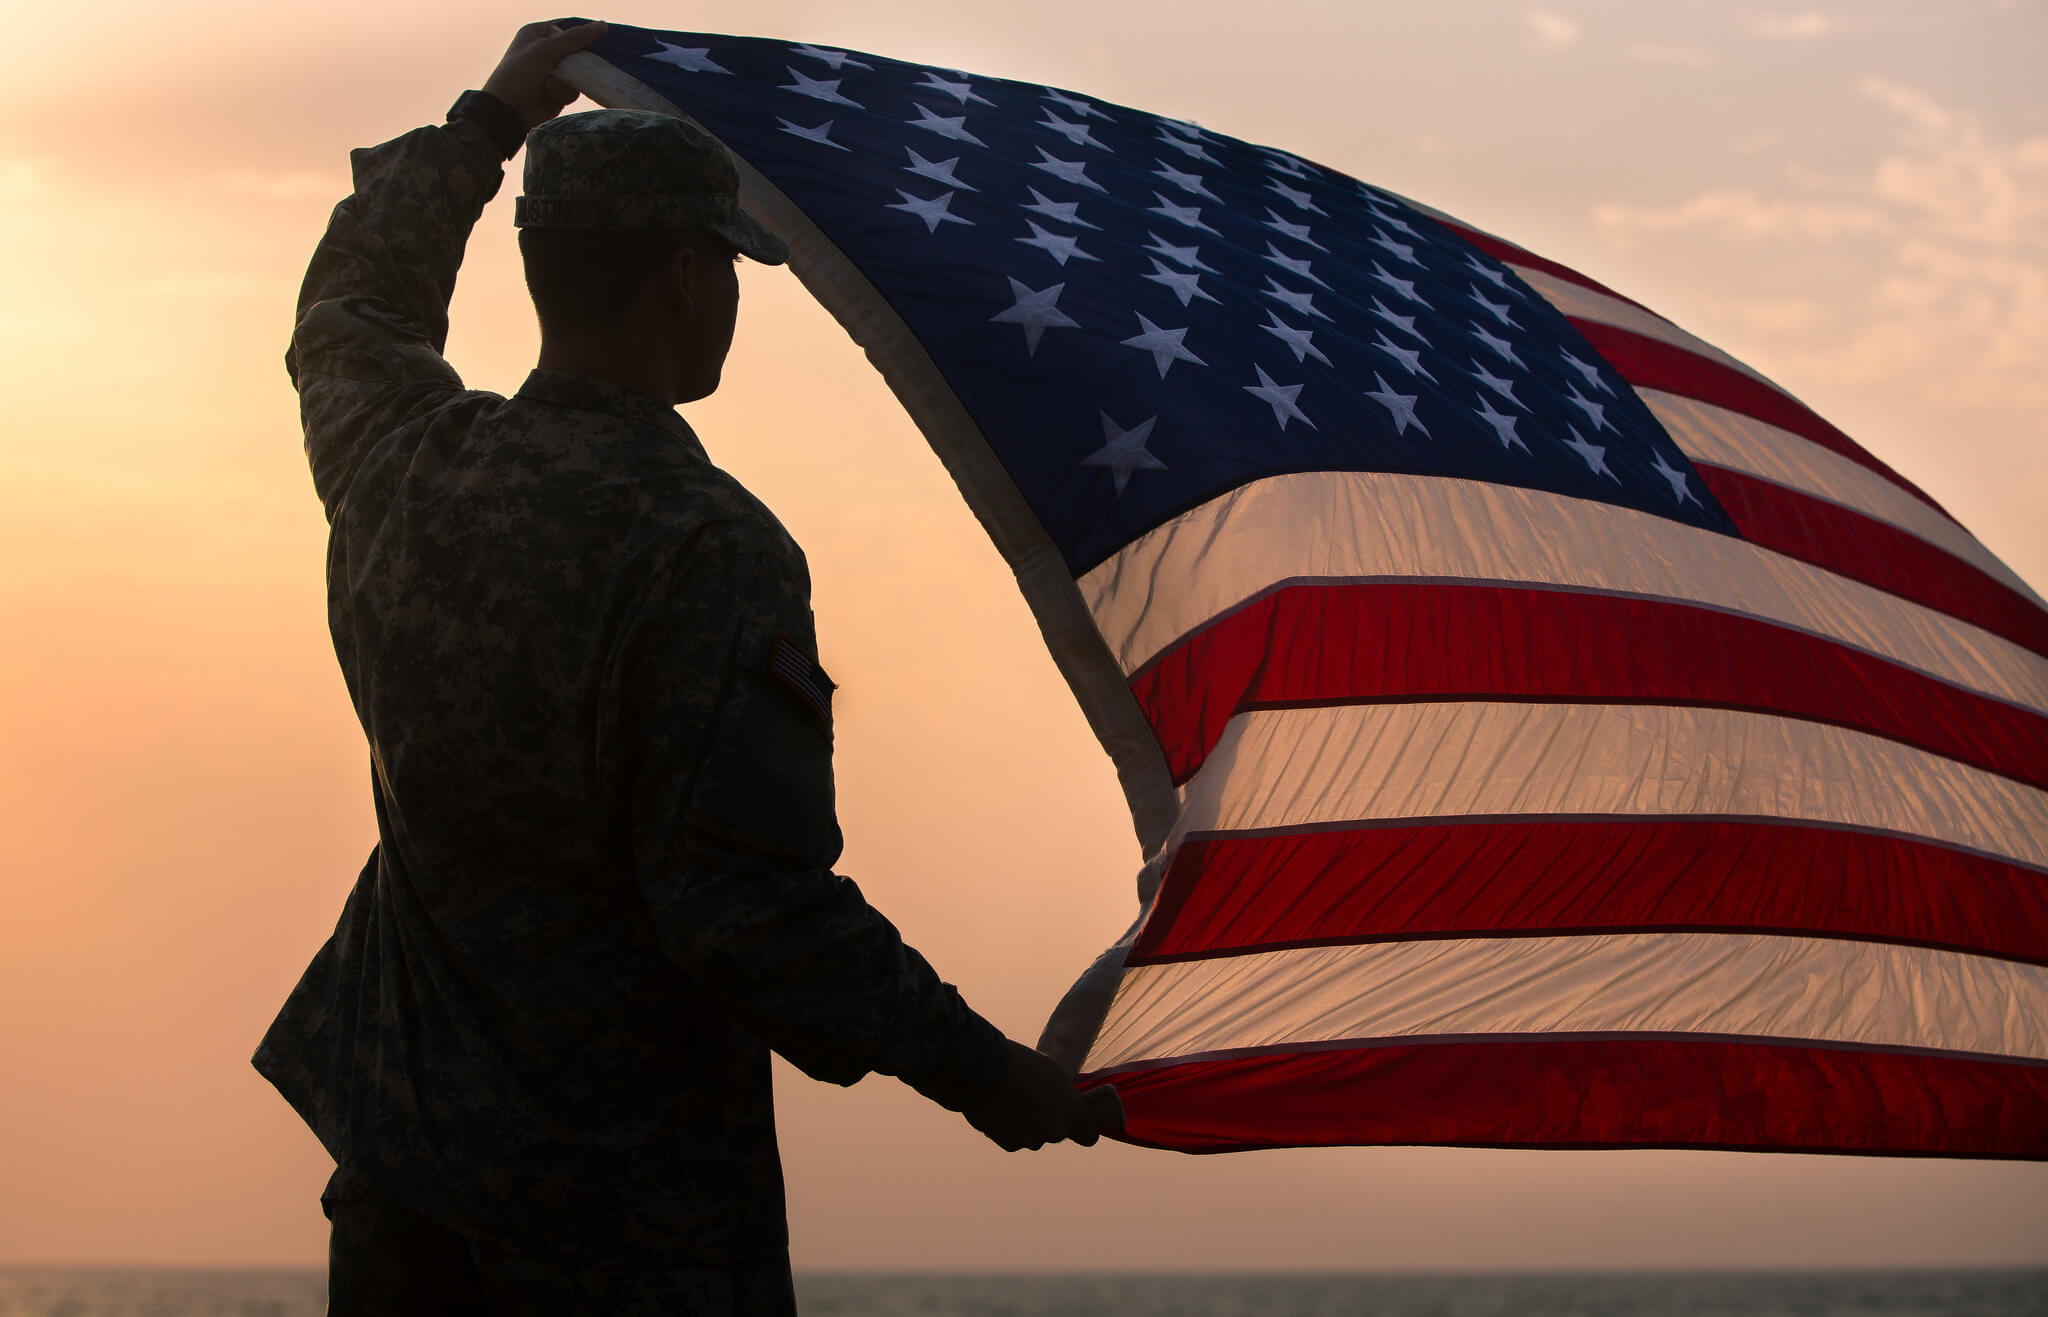 Hoekstra-foto3-U.S. Army communication specialist holds up the U.S. flag during a ceremony at Barclay Training Center in Liberia-Ja. 1 2015- -DVIDSHUB-Flickr-U.S. Army photo by Spc. Rashene Mincy, 55th Signal Company